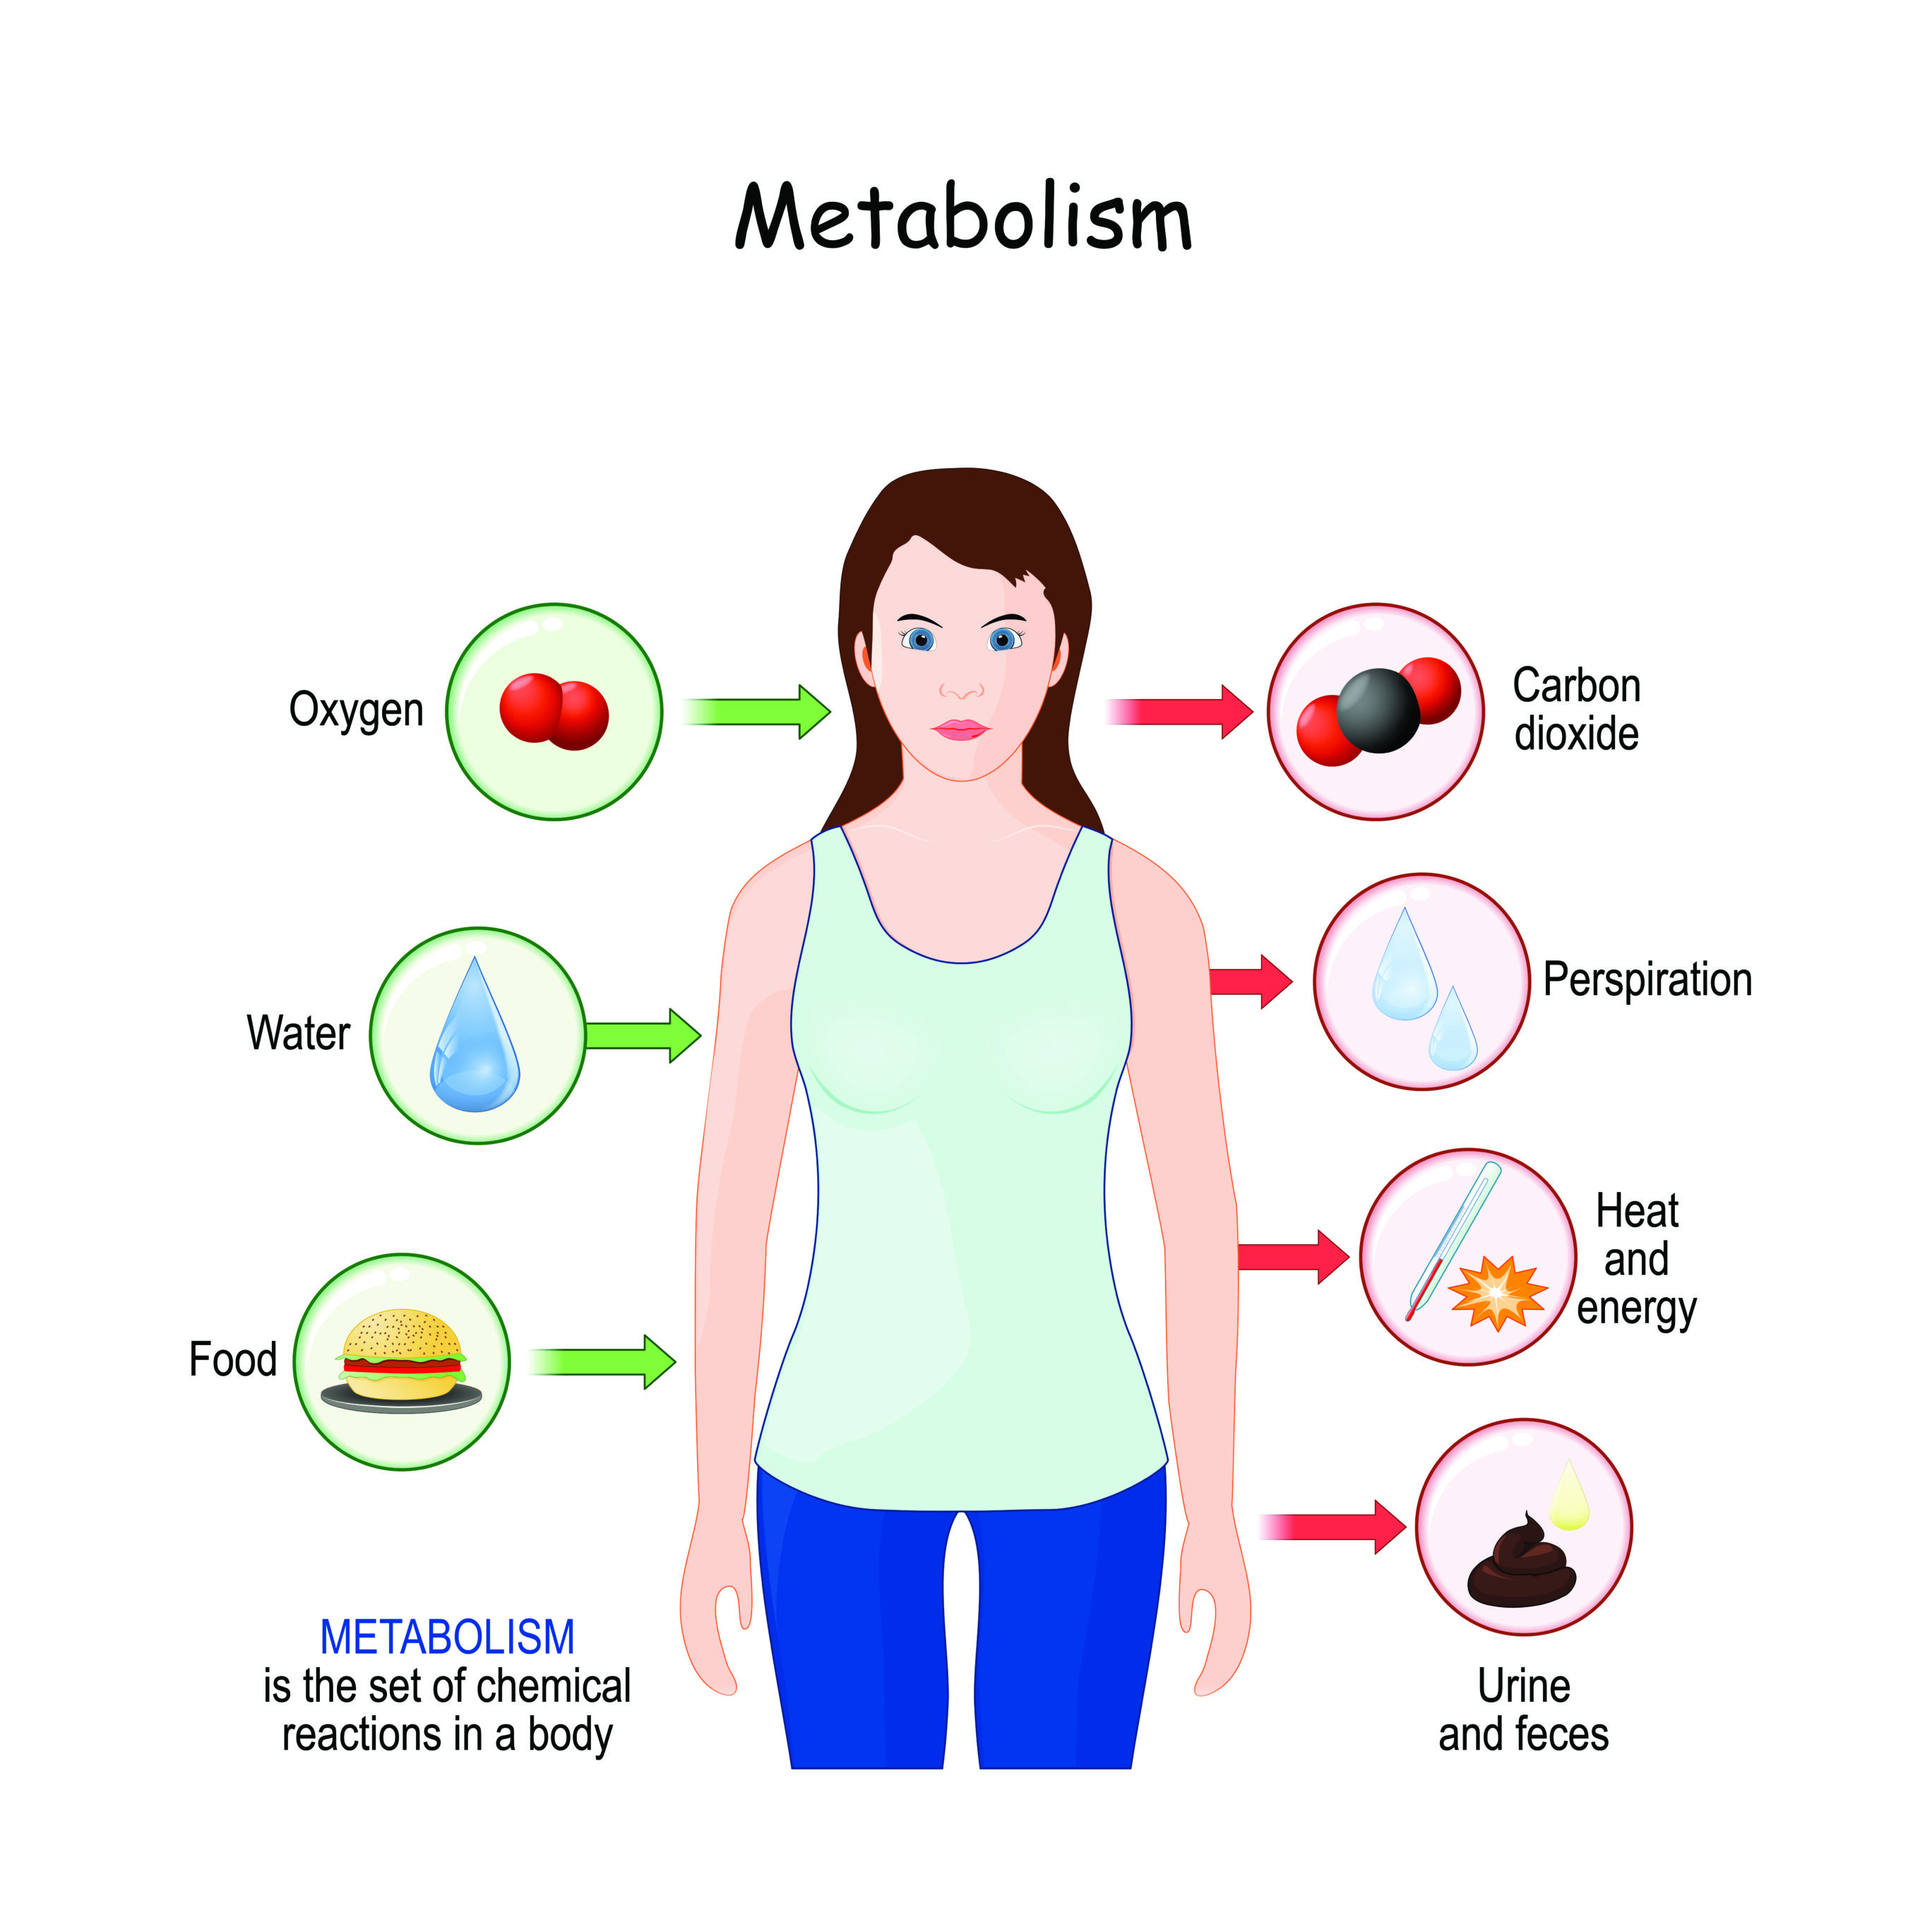 Metabolism is the set of chemical reactions in a body